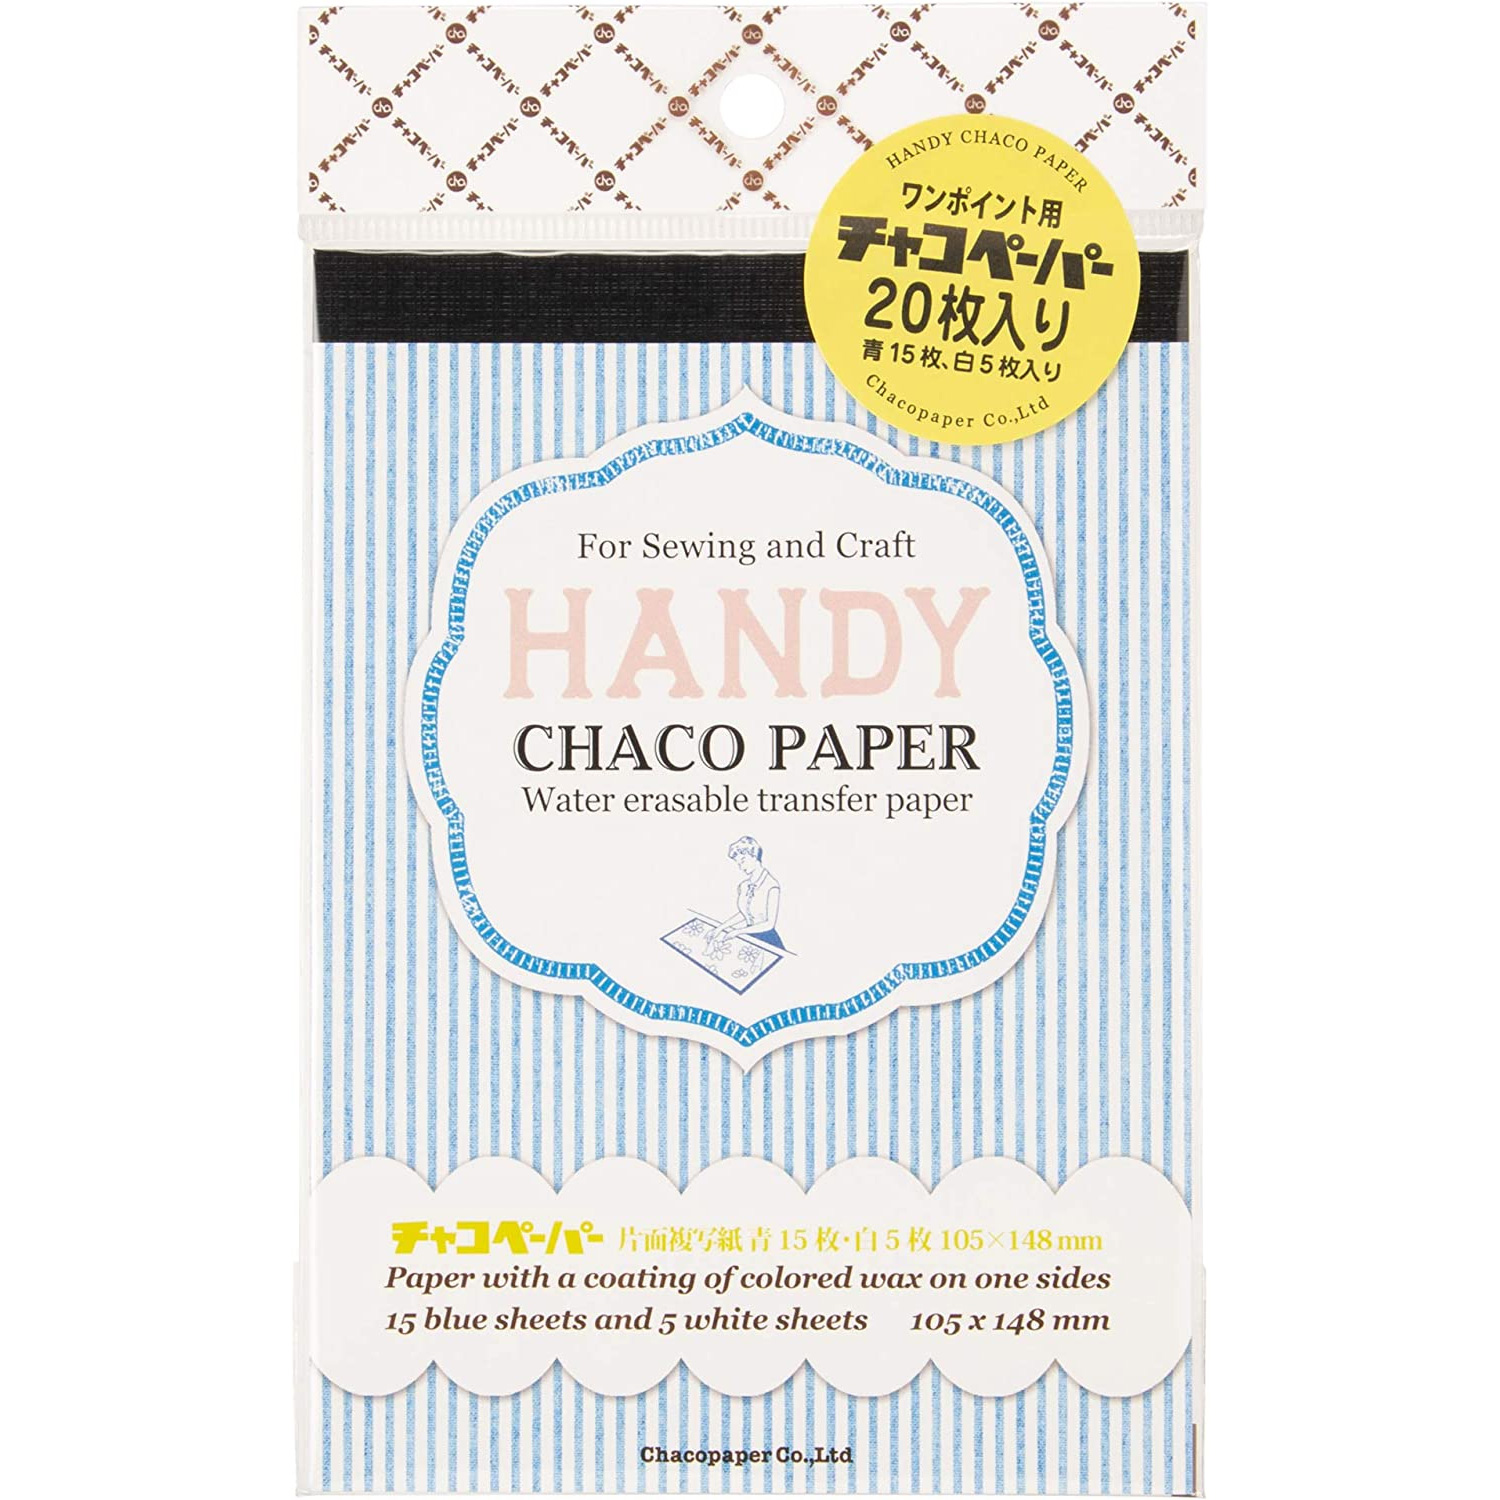 CY-A6 Handy Chaco Paper"""", one-sided"""", blue/white (sheet)